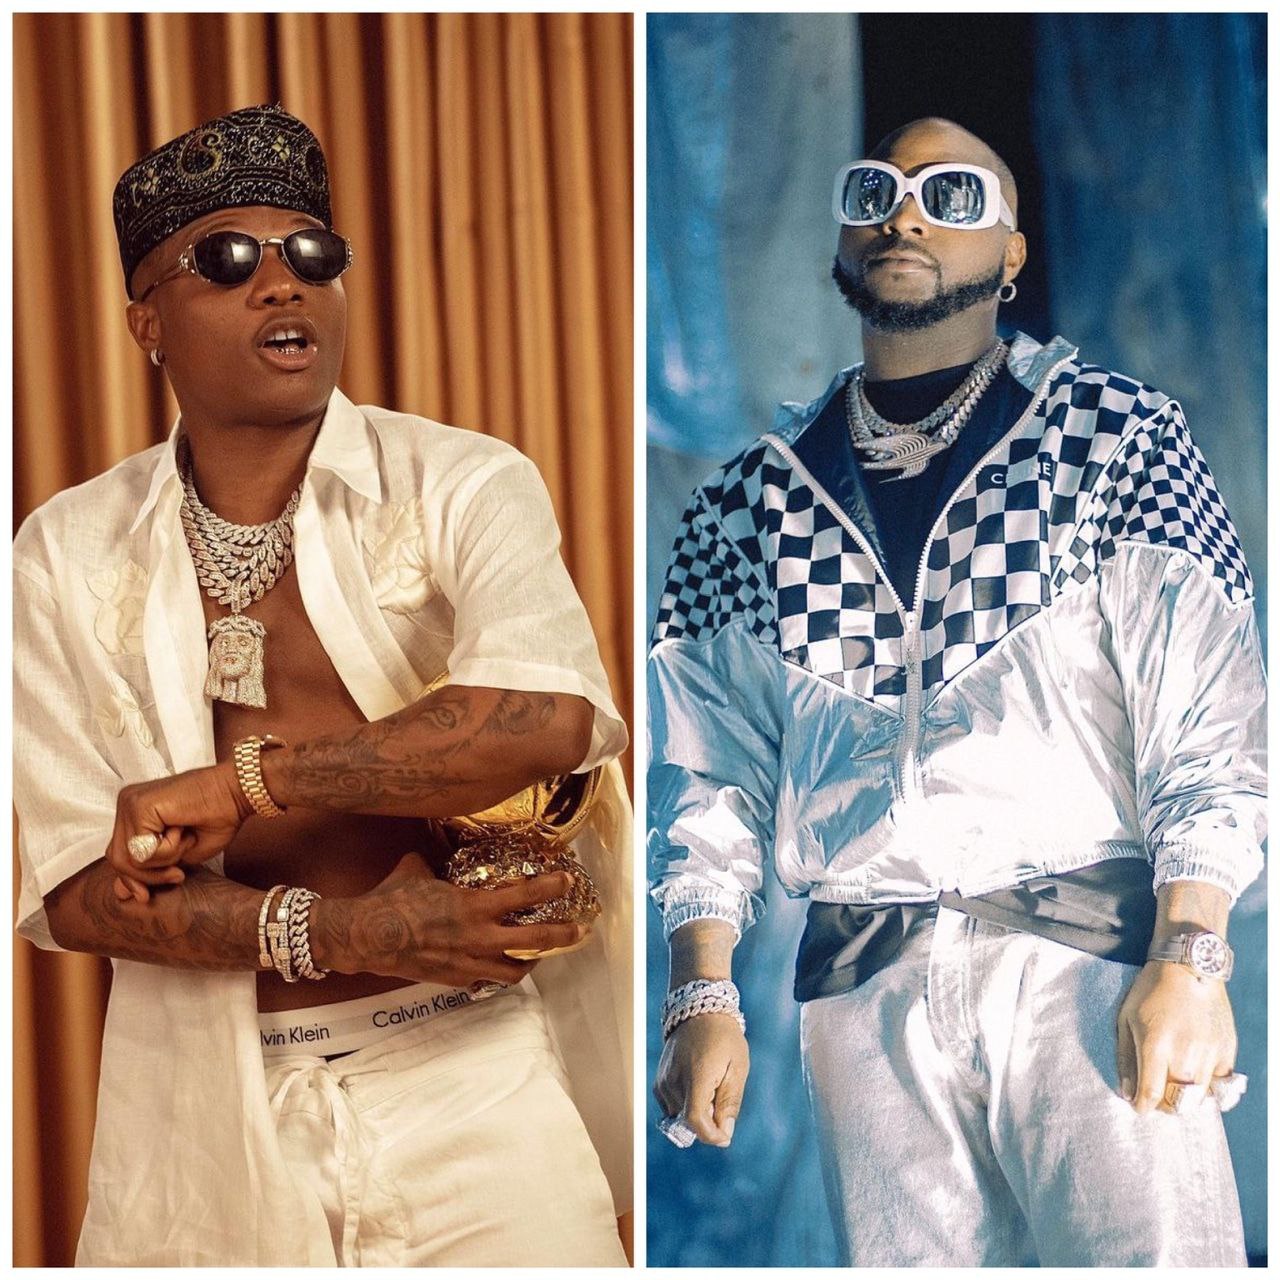 Wizkid To Go On Tour With Davido After Years Of Supremacy Battle